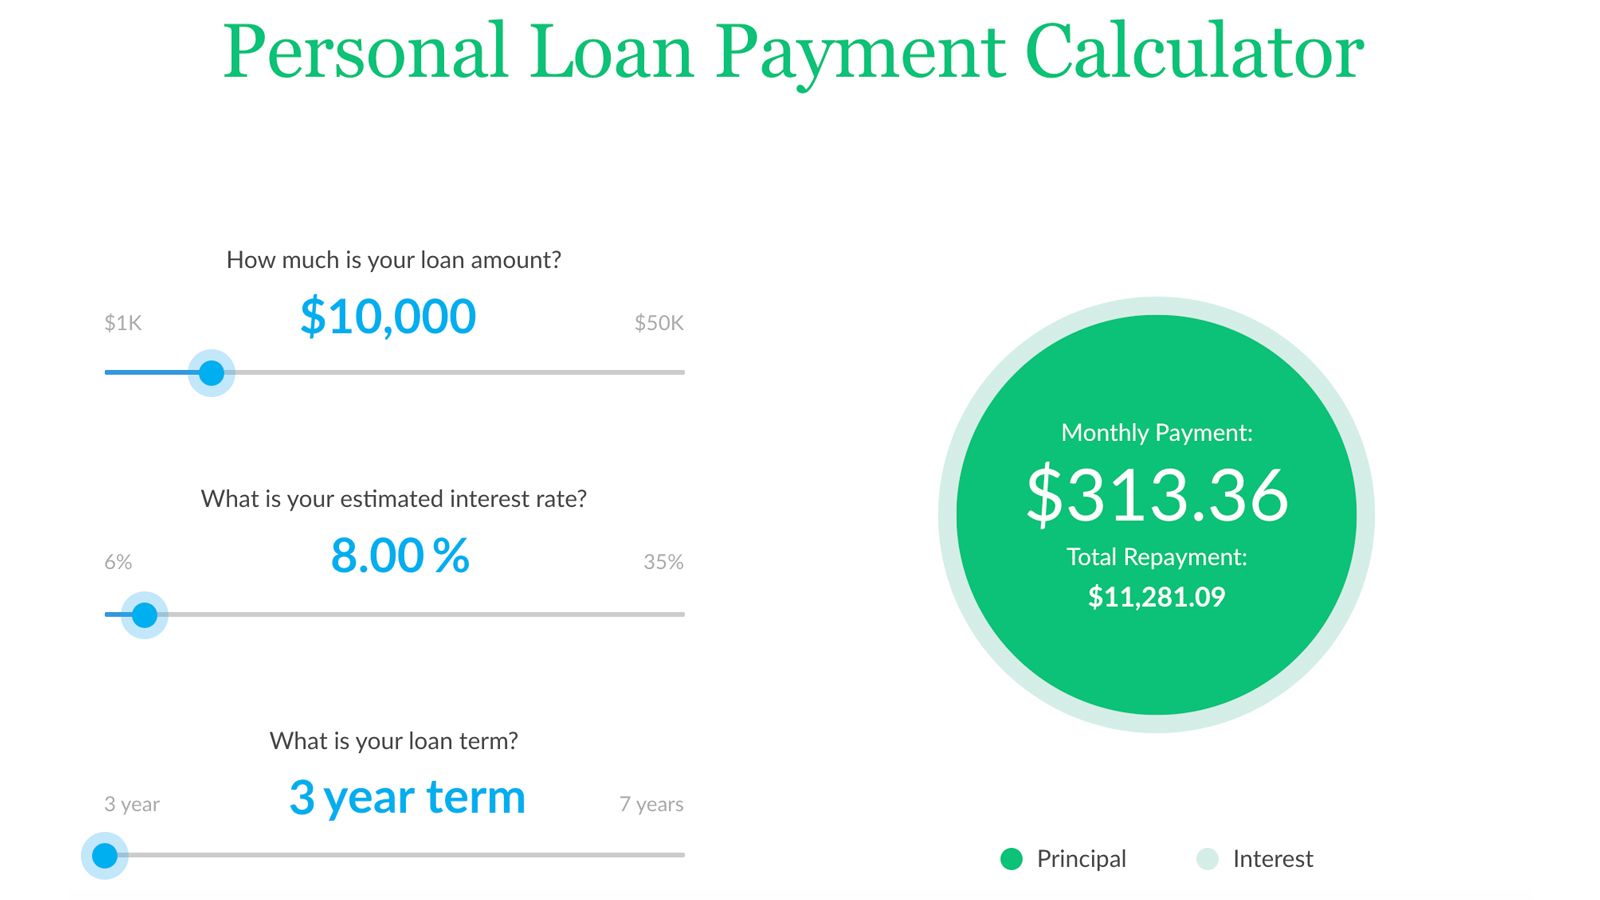 Where to get a $70,000 personal loan